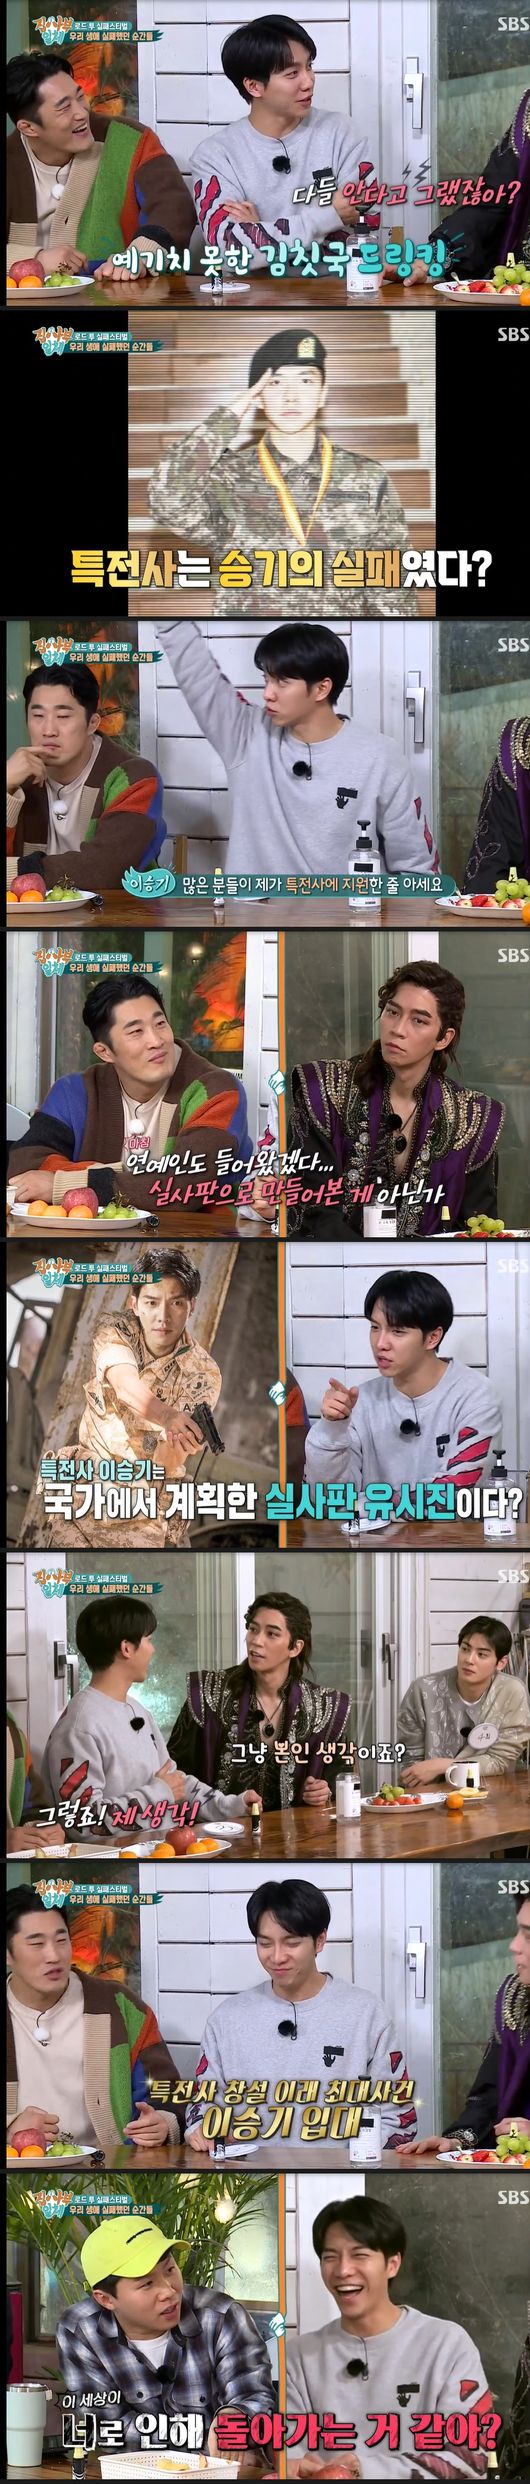 Lee Seung-gi told All The Butlers about the special warrior support.Sabu Lee Sang-min and Tak Jae-hoon appeared on SBS entertainment All The Butlers broadcast on the 7th.On this day, the crew told the members that it was a huge project before meeting the mysterious Sabu, and they were all nervous.Yang Se-heeong decided to pick up the members and decided to go to meet Kim Dong-hyun, Cha Eun-woo, and Lee Seung-gi.I met Lee Seung-gi, knowing nothing about Sabu.Lee Seung-gi attended the ceremony as a wedding guest of the announcer, saying, I was surprised by the sudden change of schedule, saying, I did not eat rice and I did not eat rice. I do not have a camera, the artist took a cell phone, he said, Is it true that I would have come in a suit?The members except Shin Sung-rok arrived somewhere in Paju where Sabu is located.The members who arrived at the mysterious mansion in the rare mountains were embarrassed and went inside the house to find the traces of Sabu.Yang Se-heeong found Cho Young-nams work, saying, I know who I am. He guessed that Cecibong would be Sabu.At this time, Sabu Lee Sangmin and Tak Jae-hoon revealed their identity and all were surprised and could not shut up.Yang Se-heeong said, Do you think it is Sabu of today?Lee Seung-gi also said, I do not think it is Sabu, and Tak Jae-hoon said, What are we talking about Sabu?We all decided to gather the strong players who had failed a lot around us, and to create the strongest failure line-up.Cha Eun-woo, who has failed four times before, recalled his sick past, saying, I said I could not do it too much when I was a trainee.Lee Seung-gi said he failed the third time, and everyone wondered if it was a love story in the past, saying, Is it a sad story?Lee Seung-gi said, It is a story that I know, an irreversible failure. Lee Sang-min comforted me, There is enough time for memory to turn into memories.Lee Seung-gi, who was all curious, confessed, In fact, we did not want to go to Special Warrior. All of them laughed, I did not even imagine it was the other side.Lee Seung-gi said, I did not support it directly. There was a special section of information, and I went to a relatively comfortable information department through a high competition rate, but I won a special warrior on the last day of the training camp.Lee Seung-gi said, I think it was a conspiracy theory, and as soon as I went to the army, it was popular as a descendant of the sun. I do not think that the Special Warrior came out, but I did not think I made a live-action version as an entertainer.Yang Se-heeong said, Its a funny idea, do all these people seem to be going back for you? All of them laughed, It seems like they have fulfilled their sense of duty with responsibility like a secret agent in Korea.All The Butlers broadcast screen capture